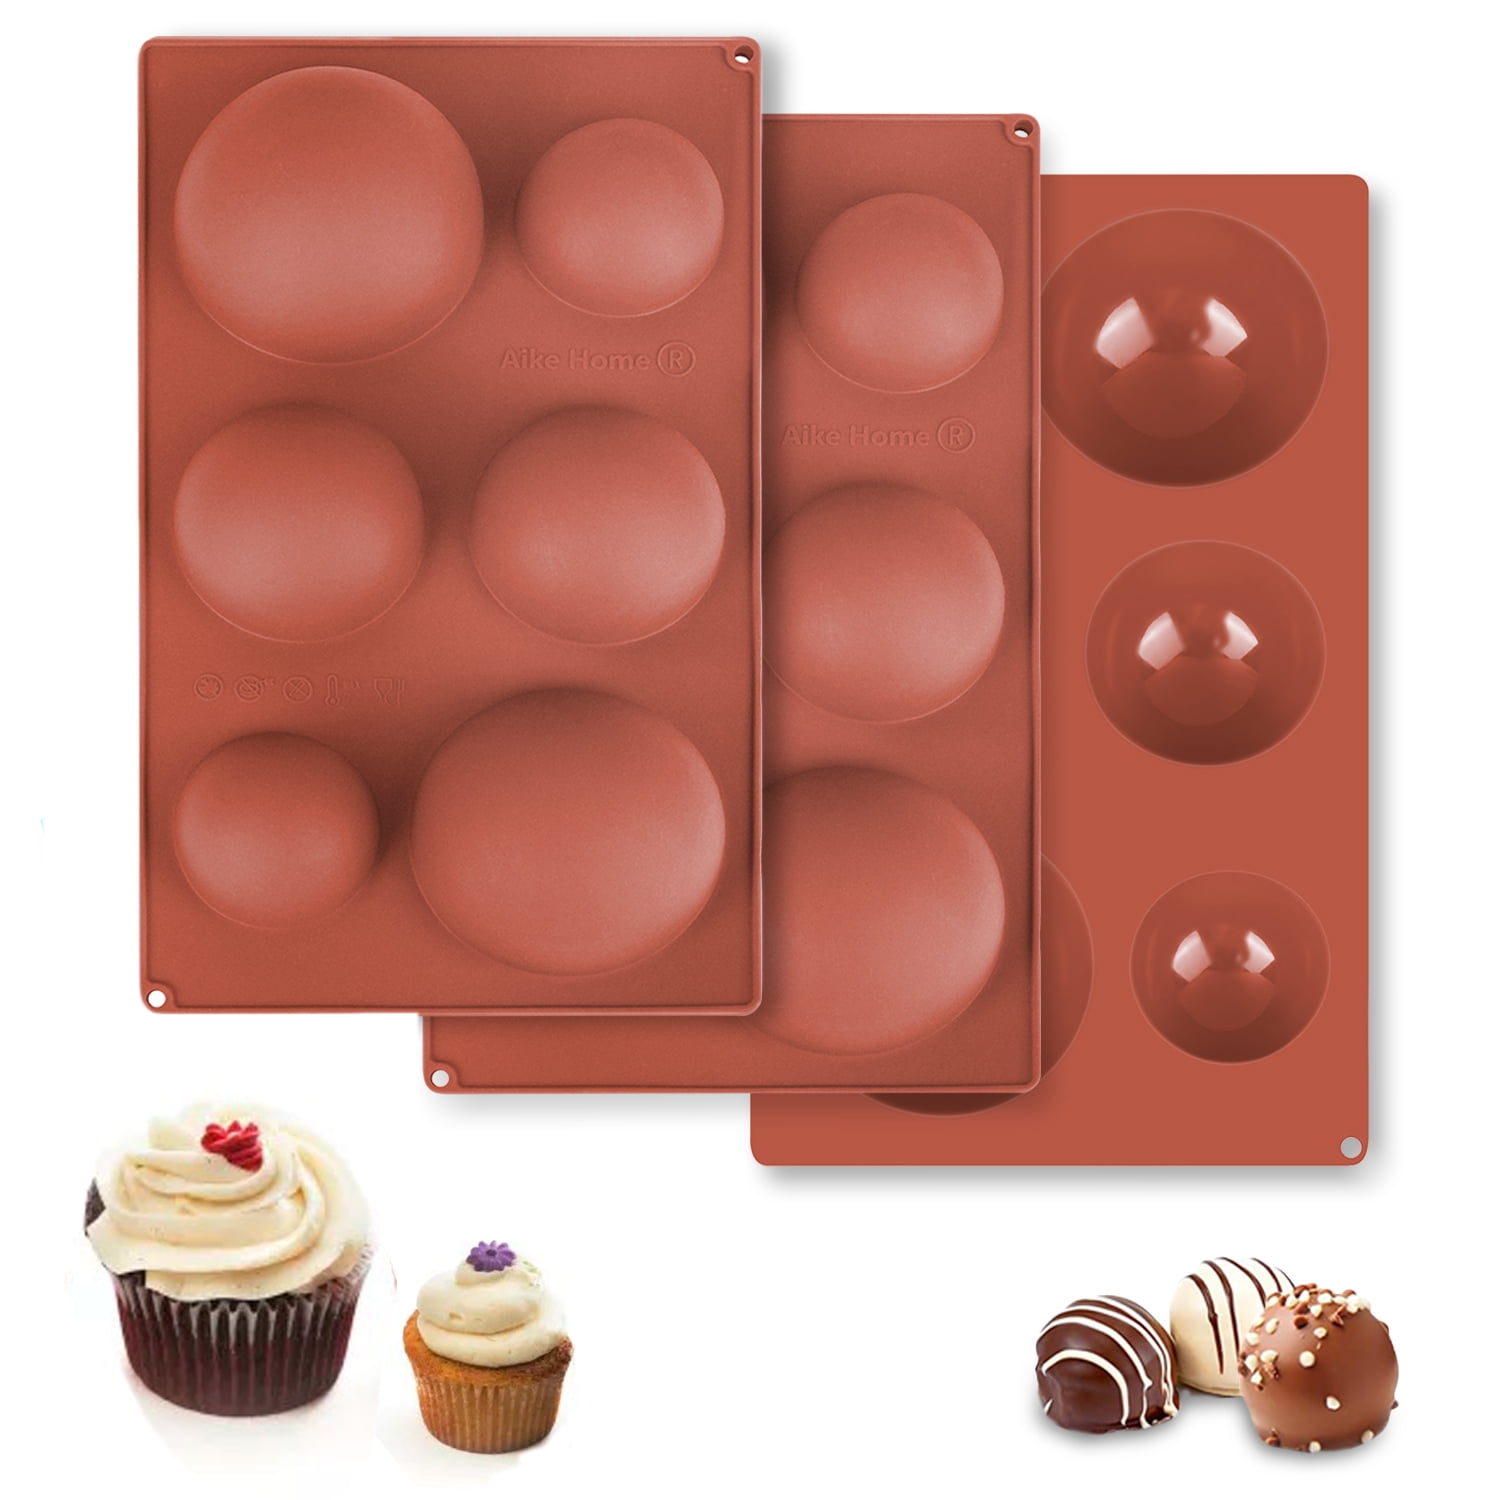 Details about   2Pack 6 Cups Silicone Cake Mold Hot Chocolate Bombs Mould 2" Half Ball Sphere JU 